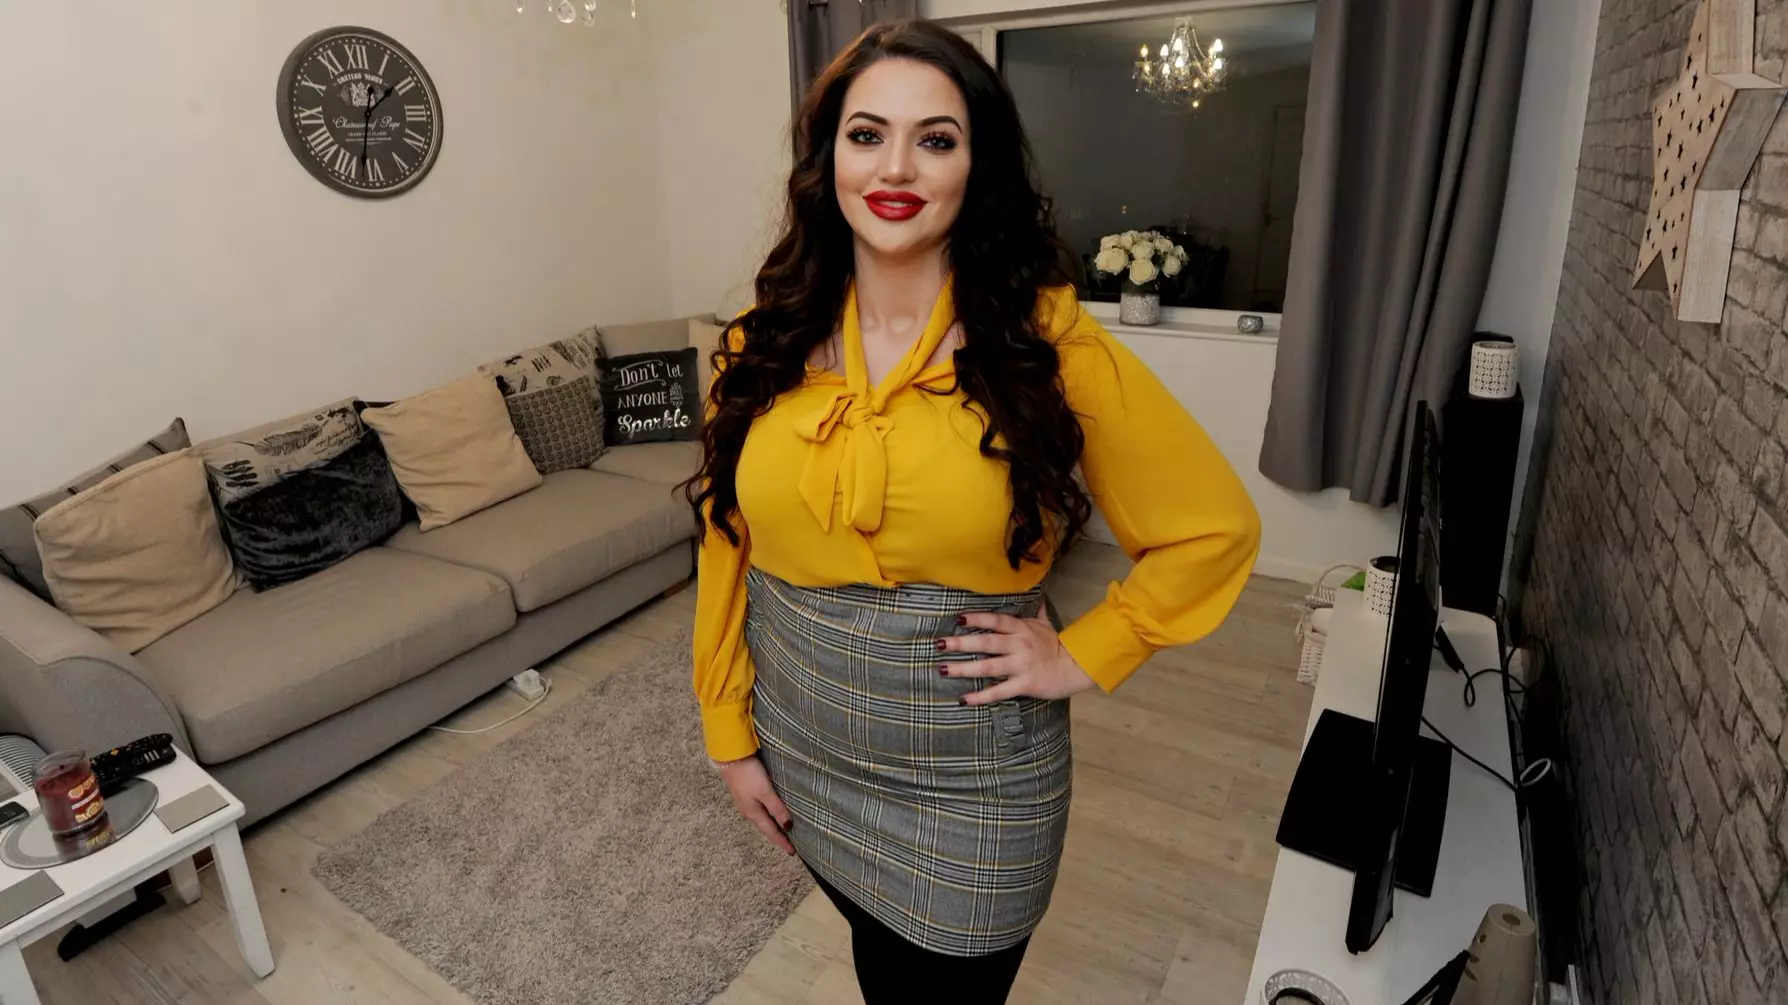 Woman Buys First Home At 20 After Putting In The Graft